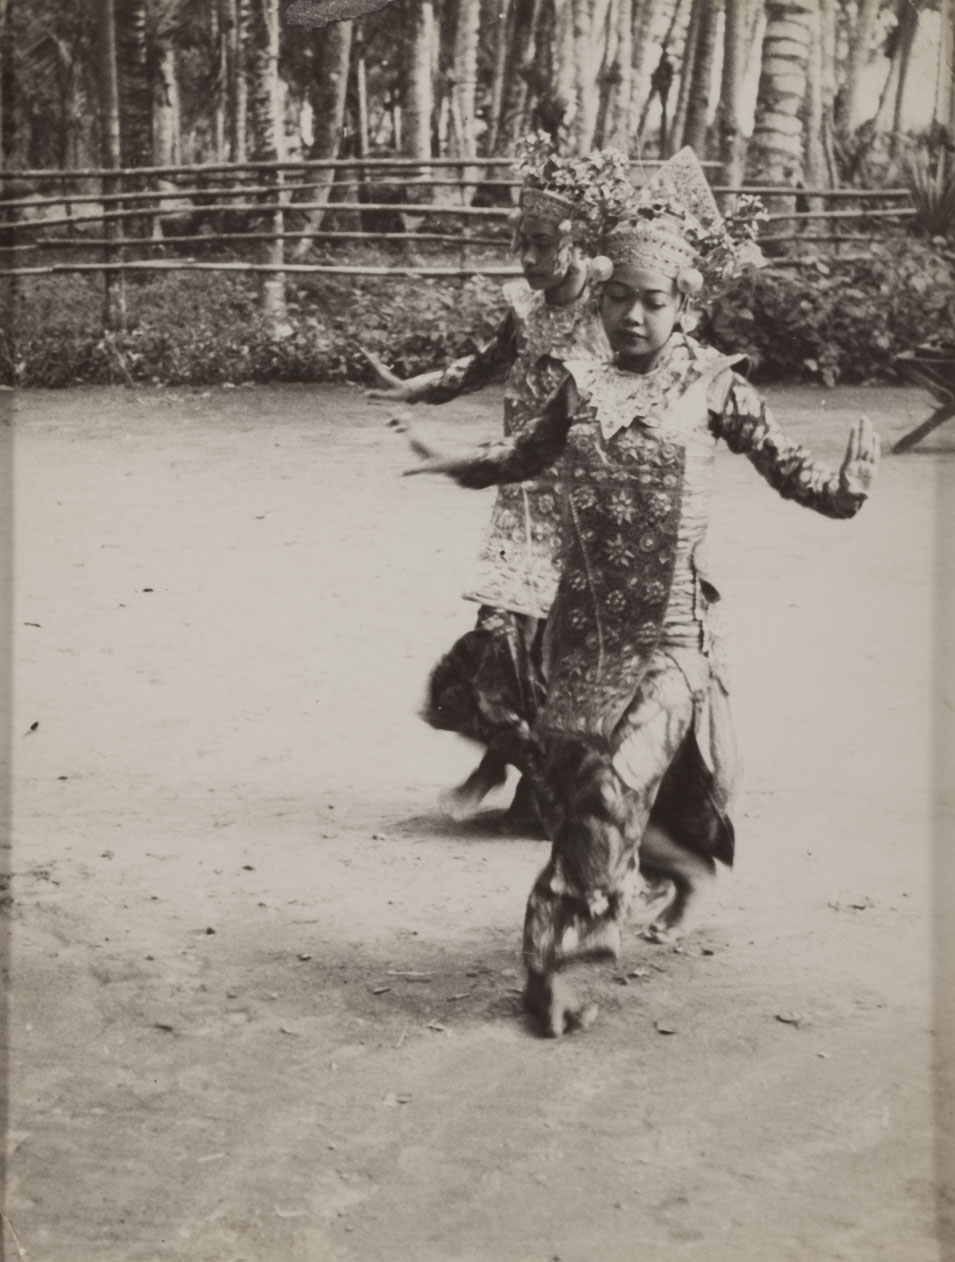 Untitled Photo by Arthur Fleischmann (Slovakian, 1896-1990, worked in Bali 1937-1939),  Photograph, 16½ x 12½ in., Collection of Andyan and Dian Ansberry Rahardja Dallas, Texas